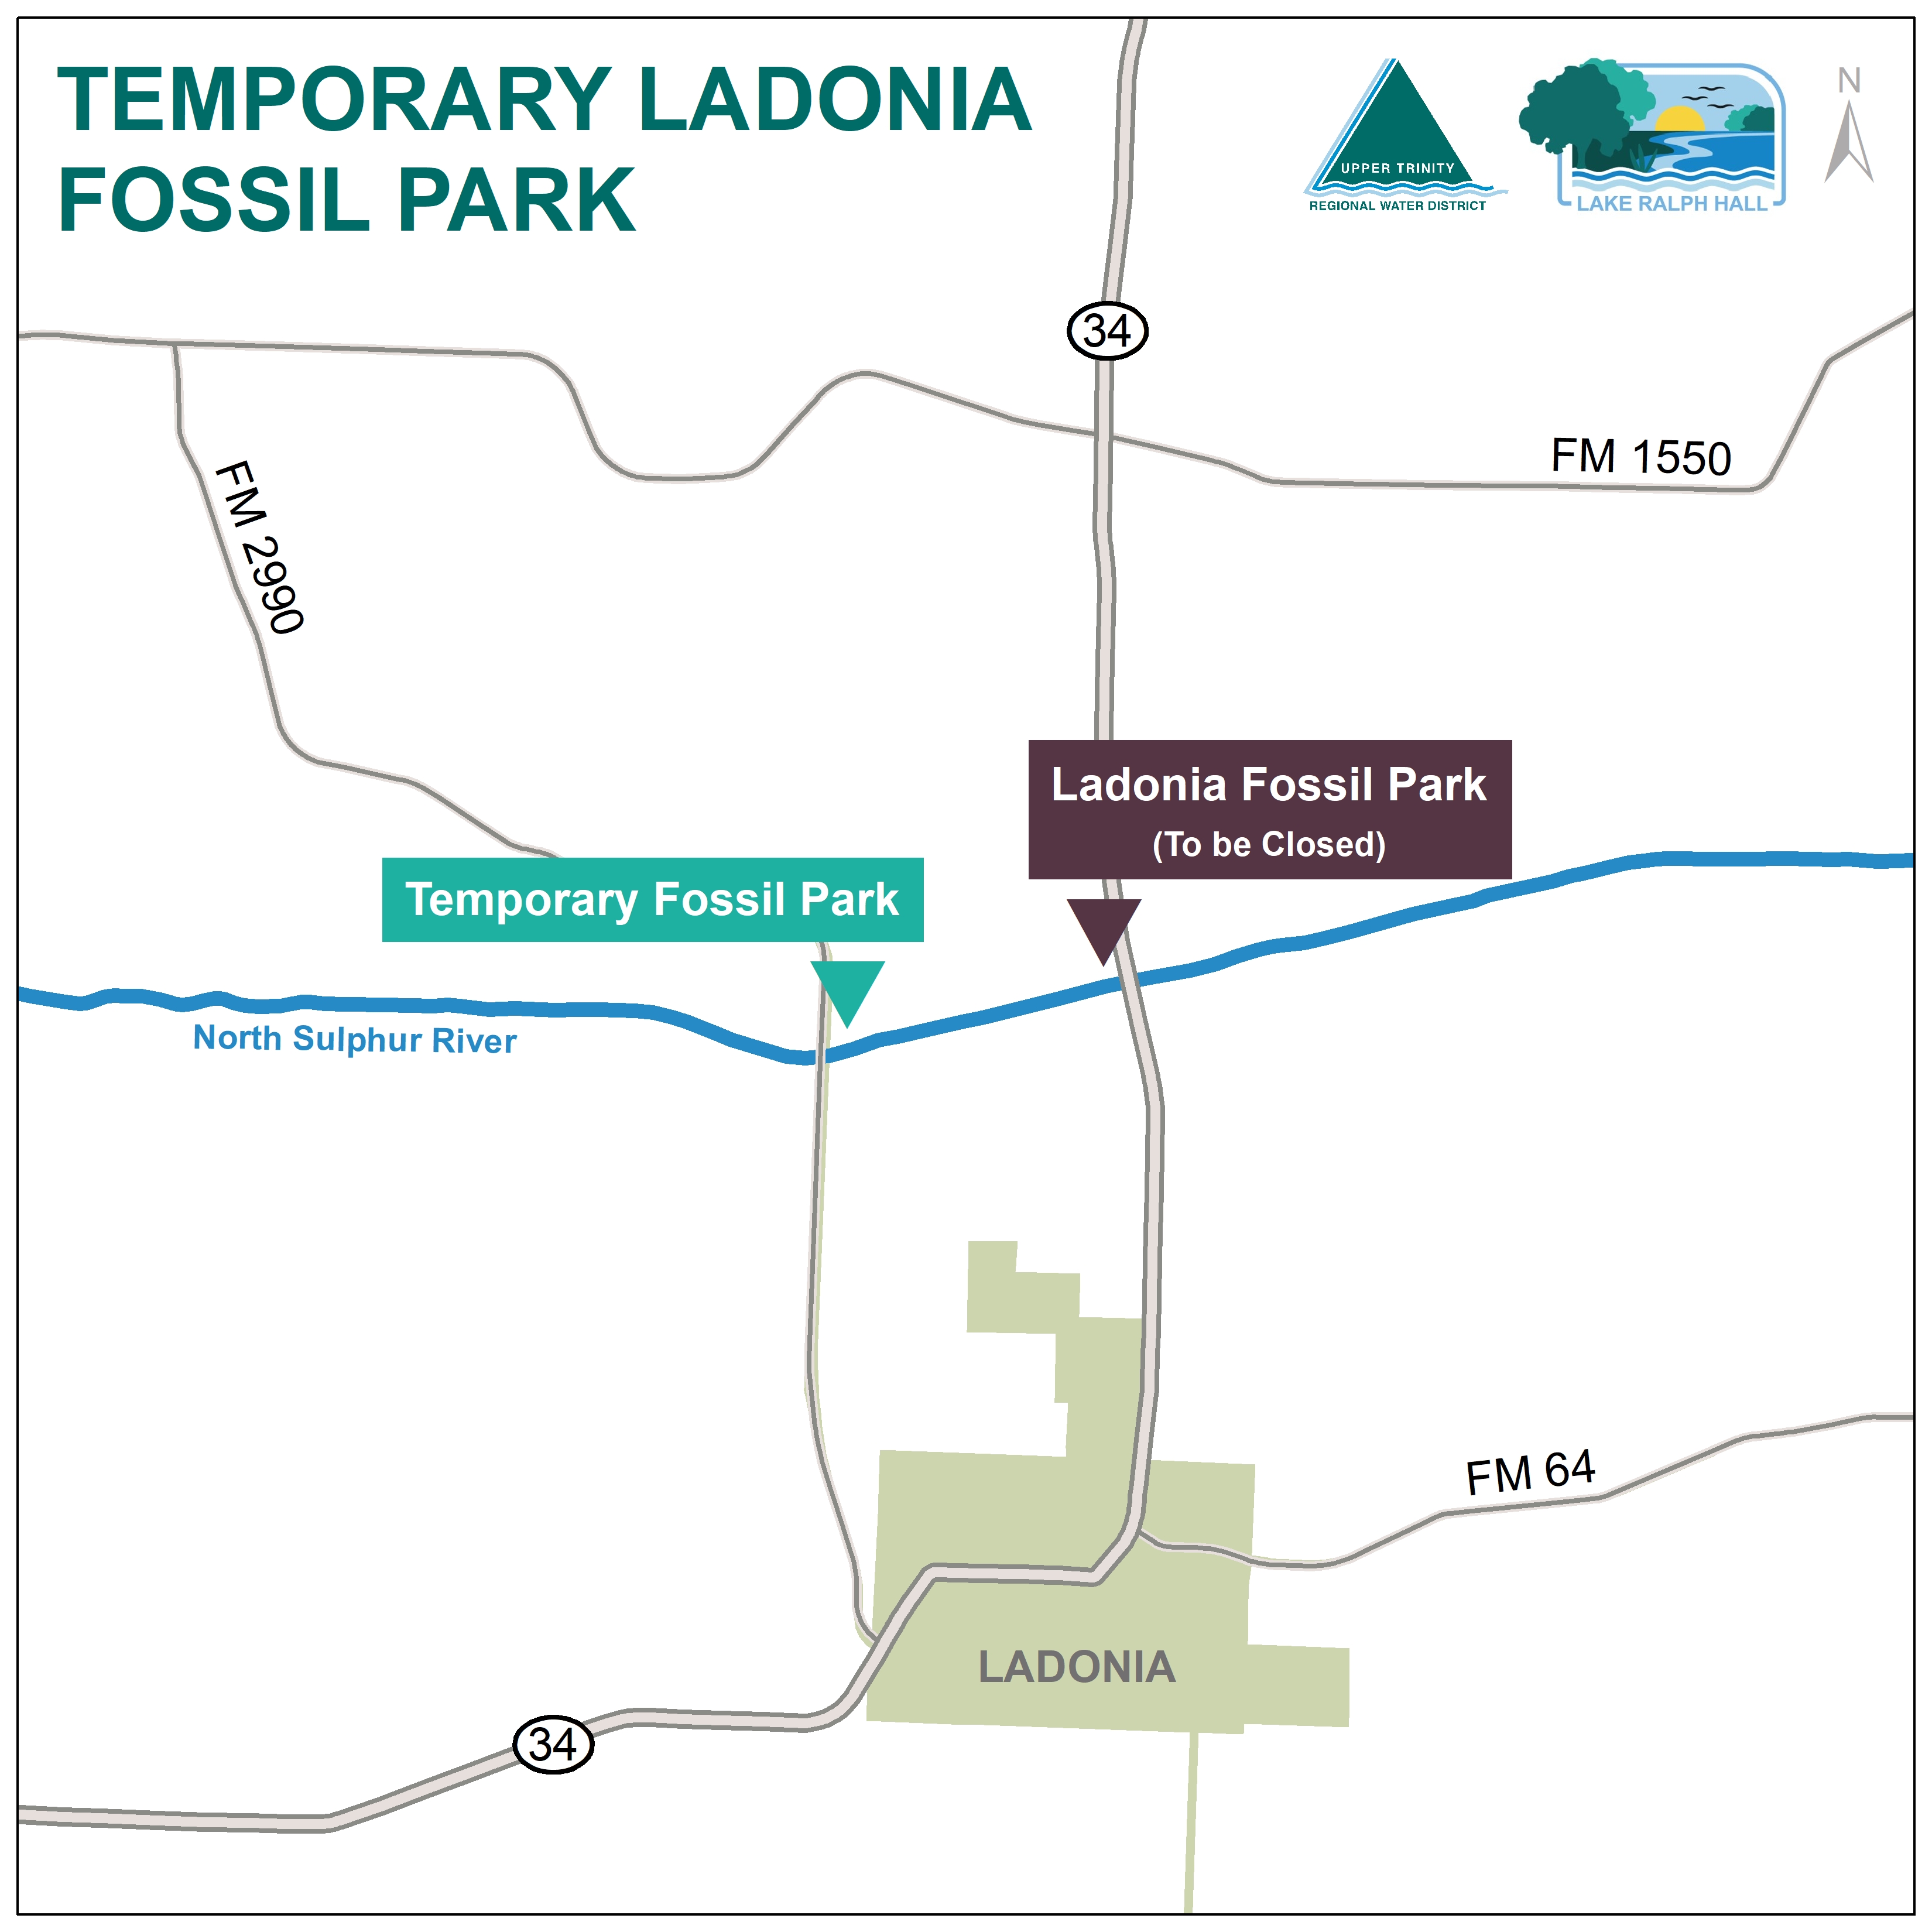 Temporary Ladonia Fossil Park Map